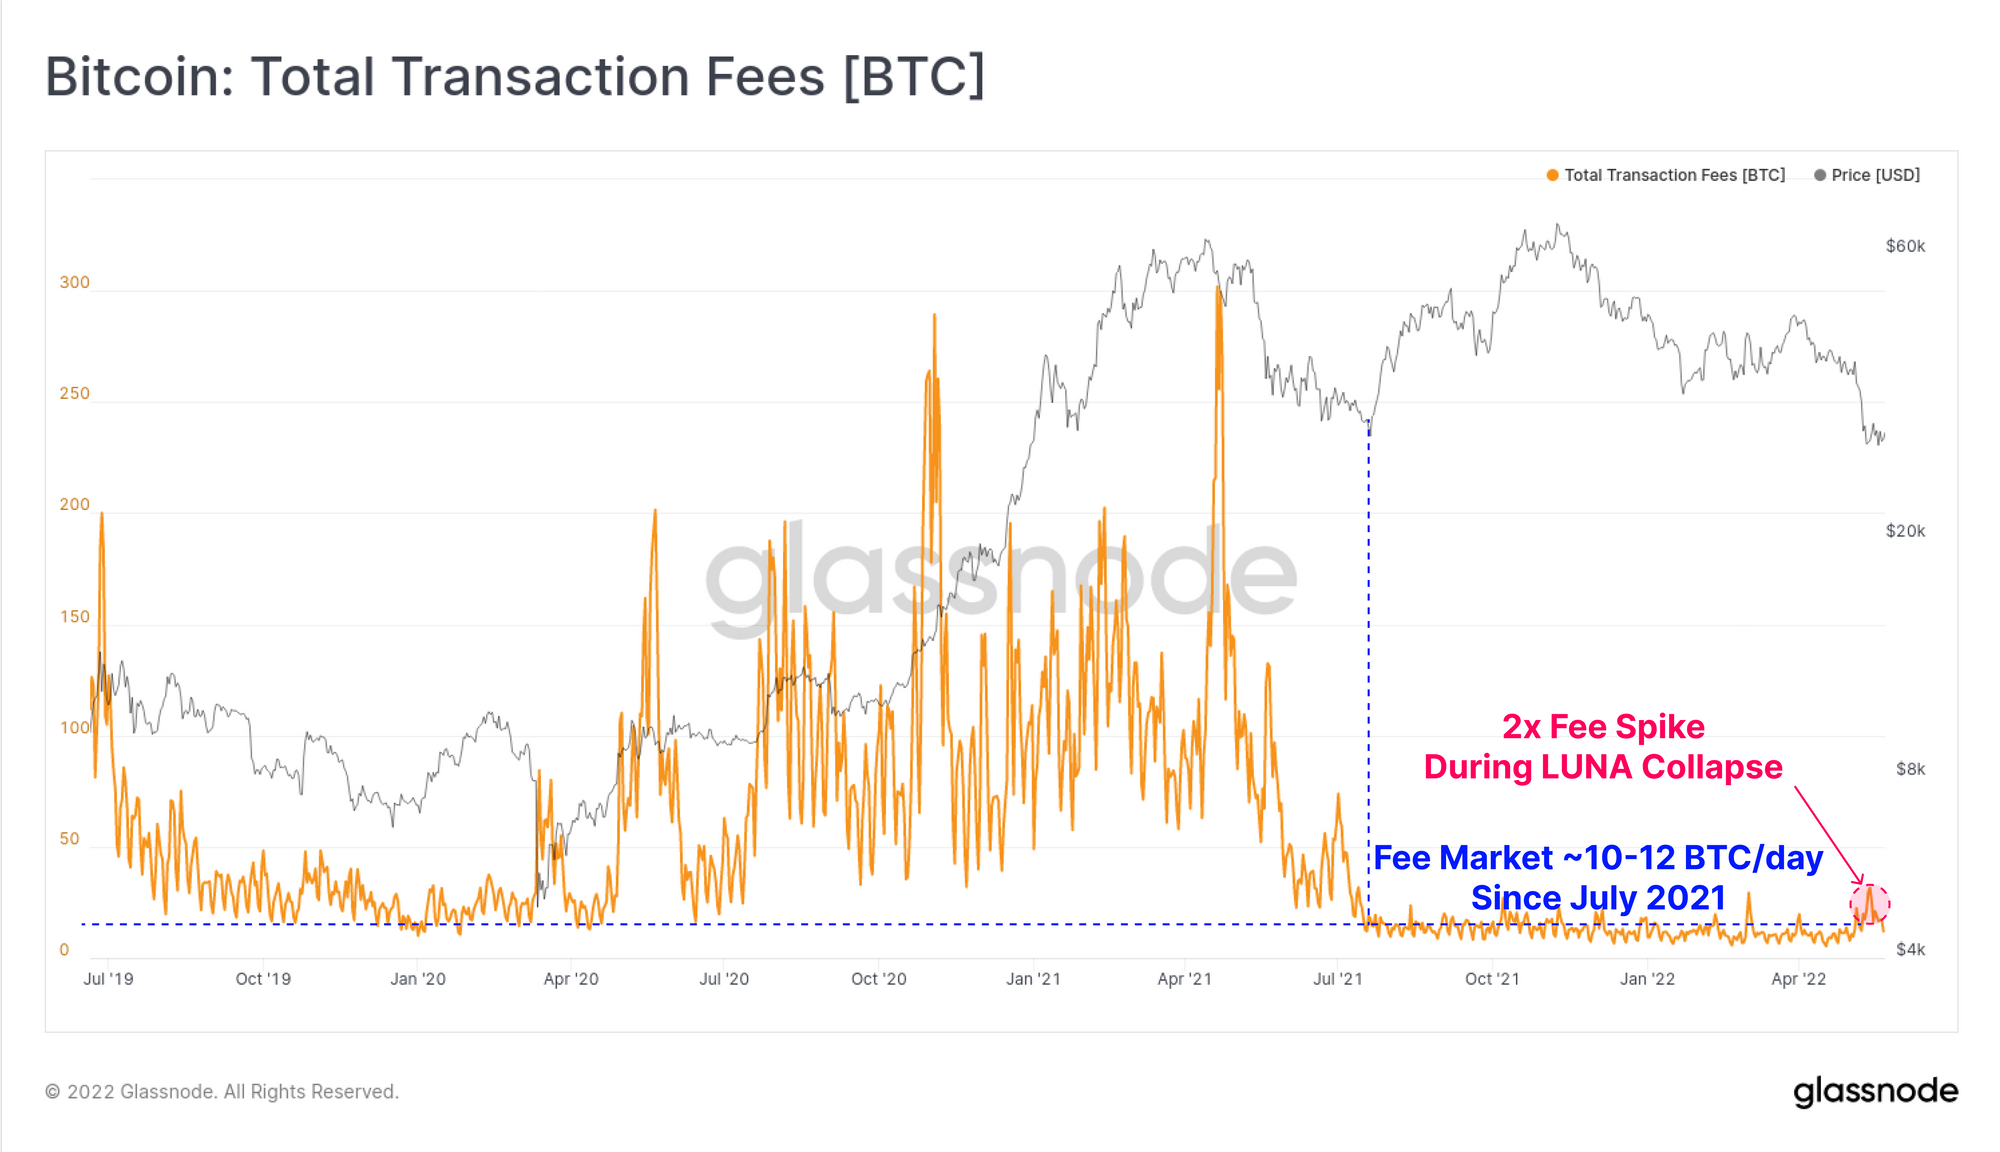 Bitcoin Transaction Fees Remain Historically Low Despite Recent Spike